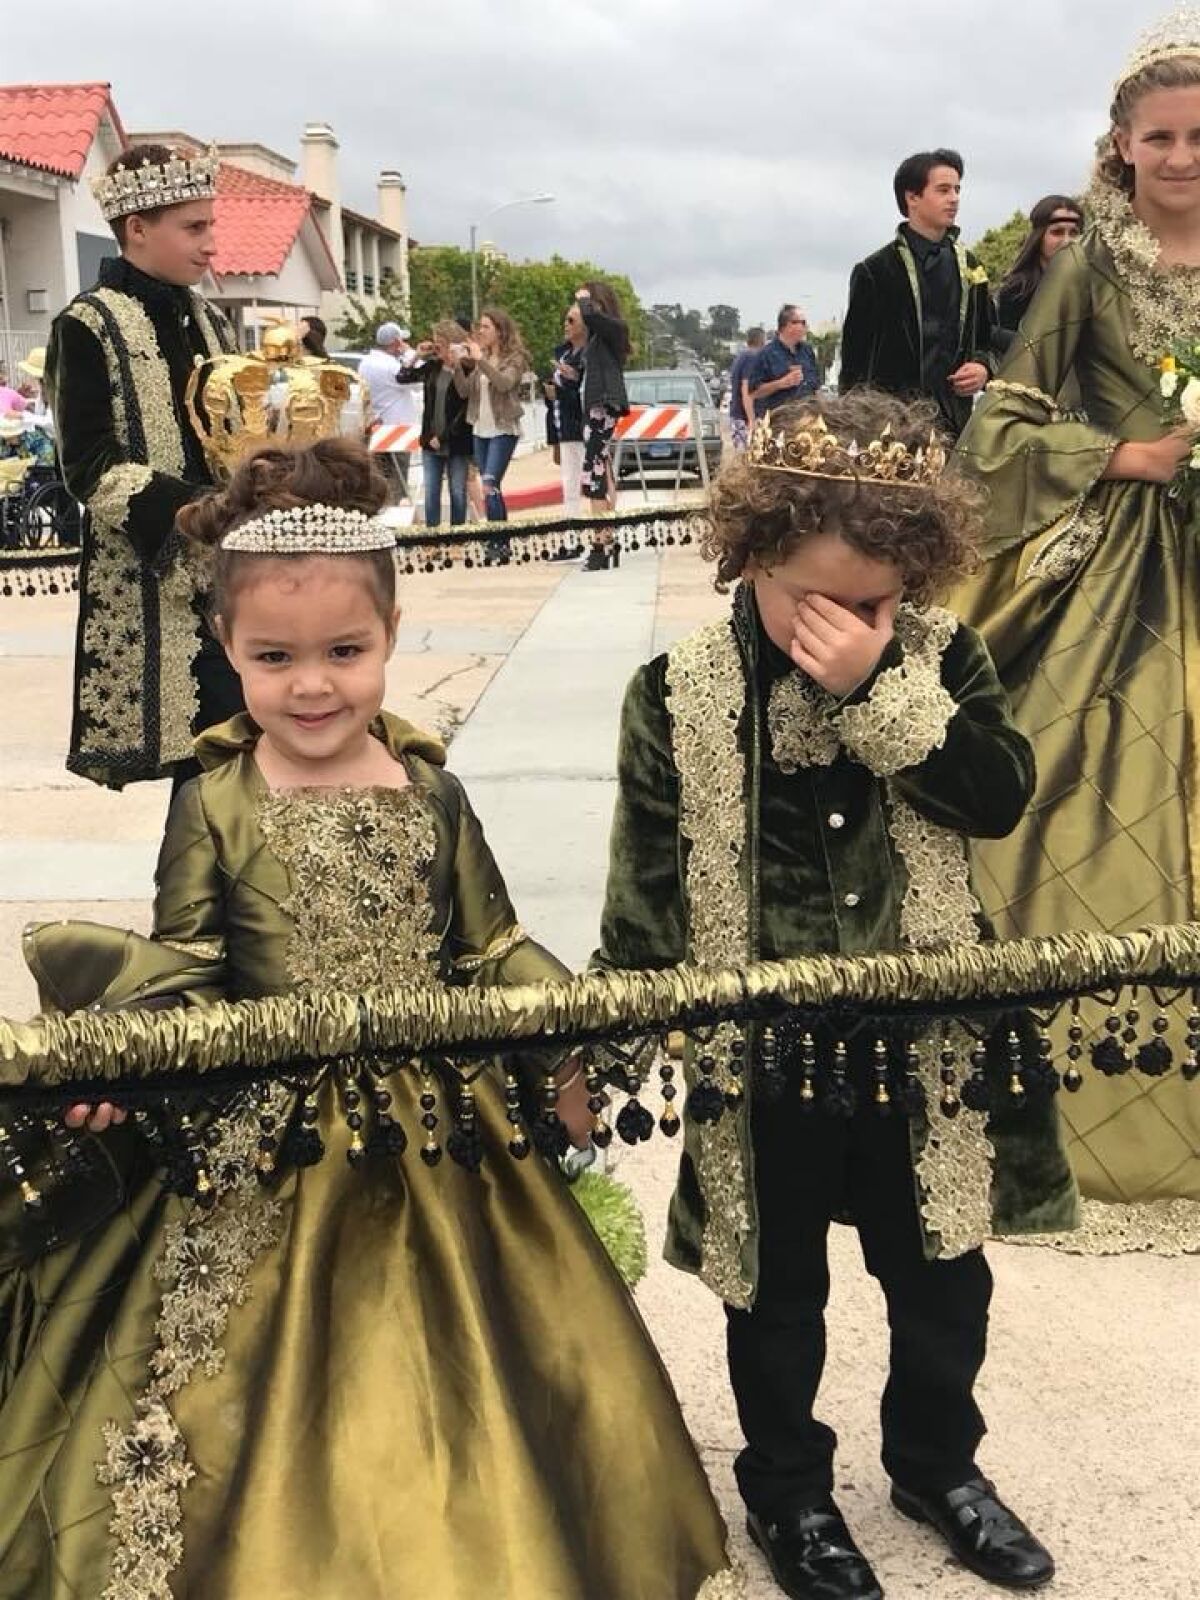 Presley Allen and J.P. Garces III seem to be experiencing the elaborate clothing of the 2018 Festa parade differently.